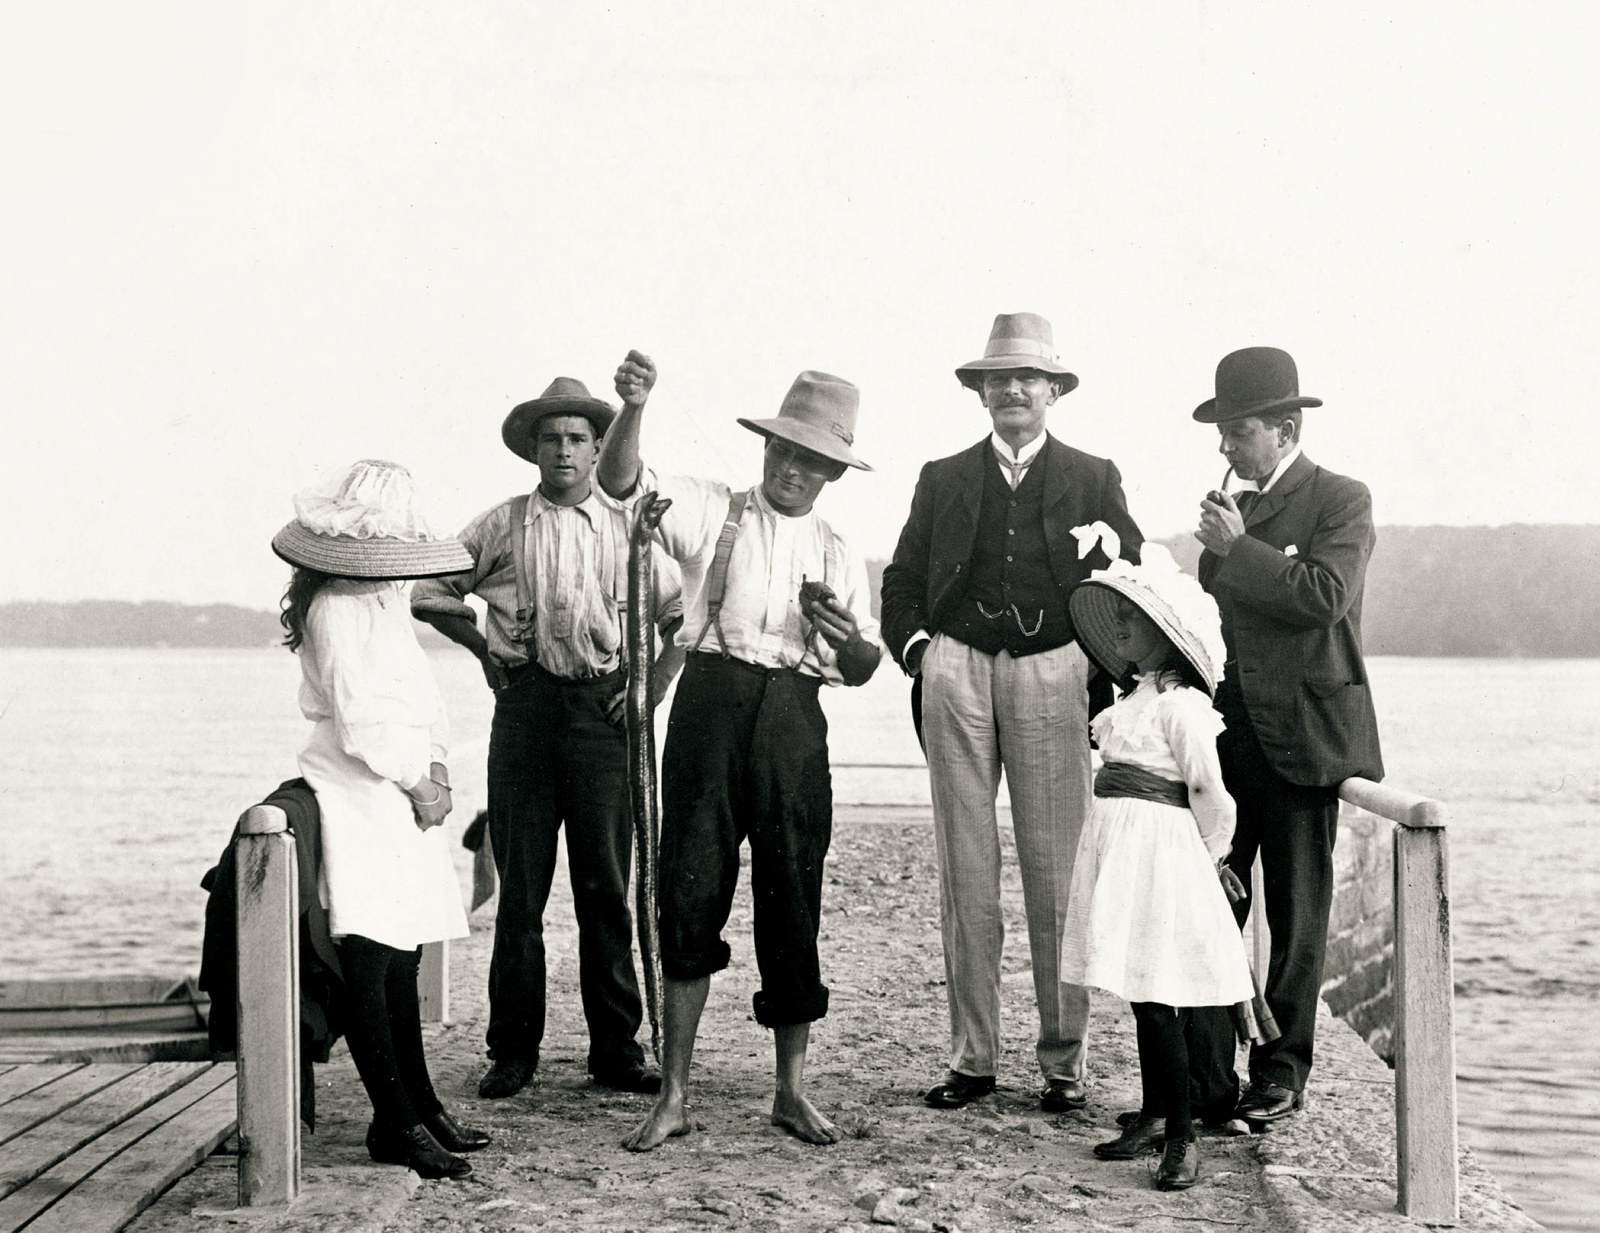 Group of children and adults gather on a jetty. Man in centre holds large eel caught on a fishing hook.